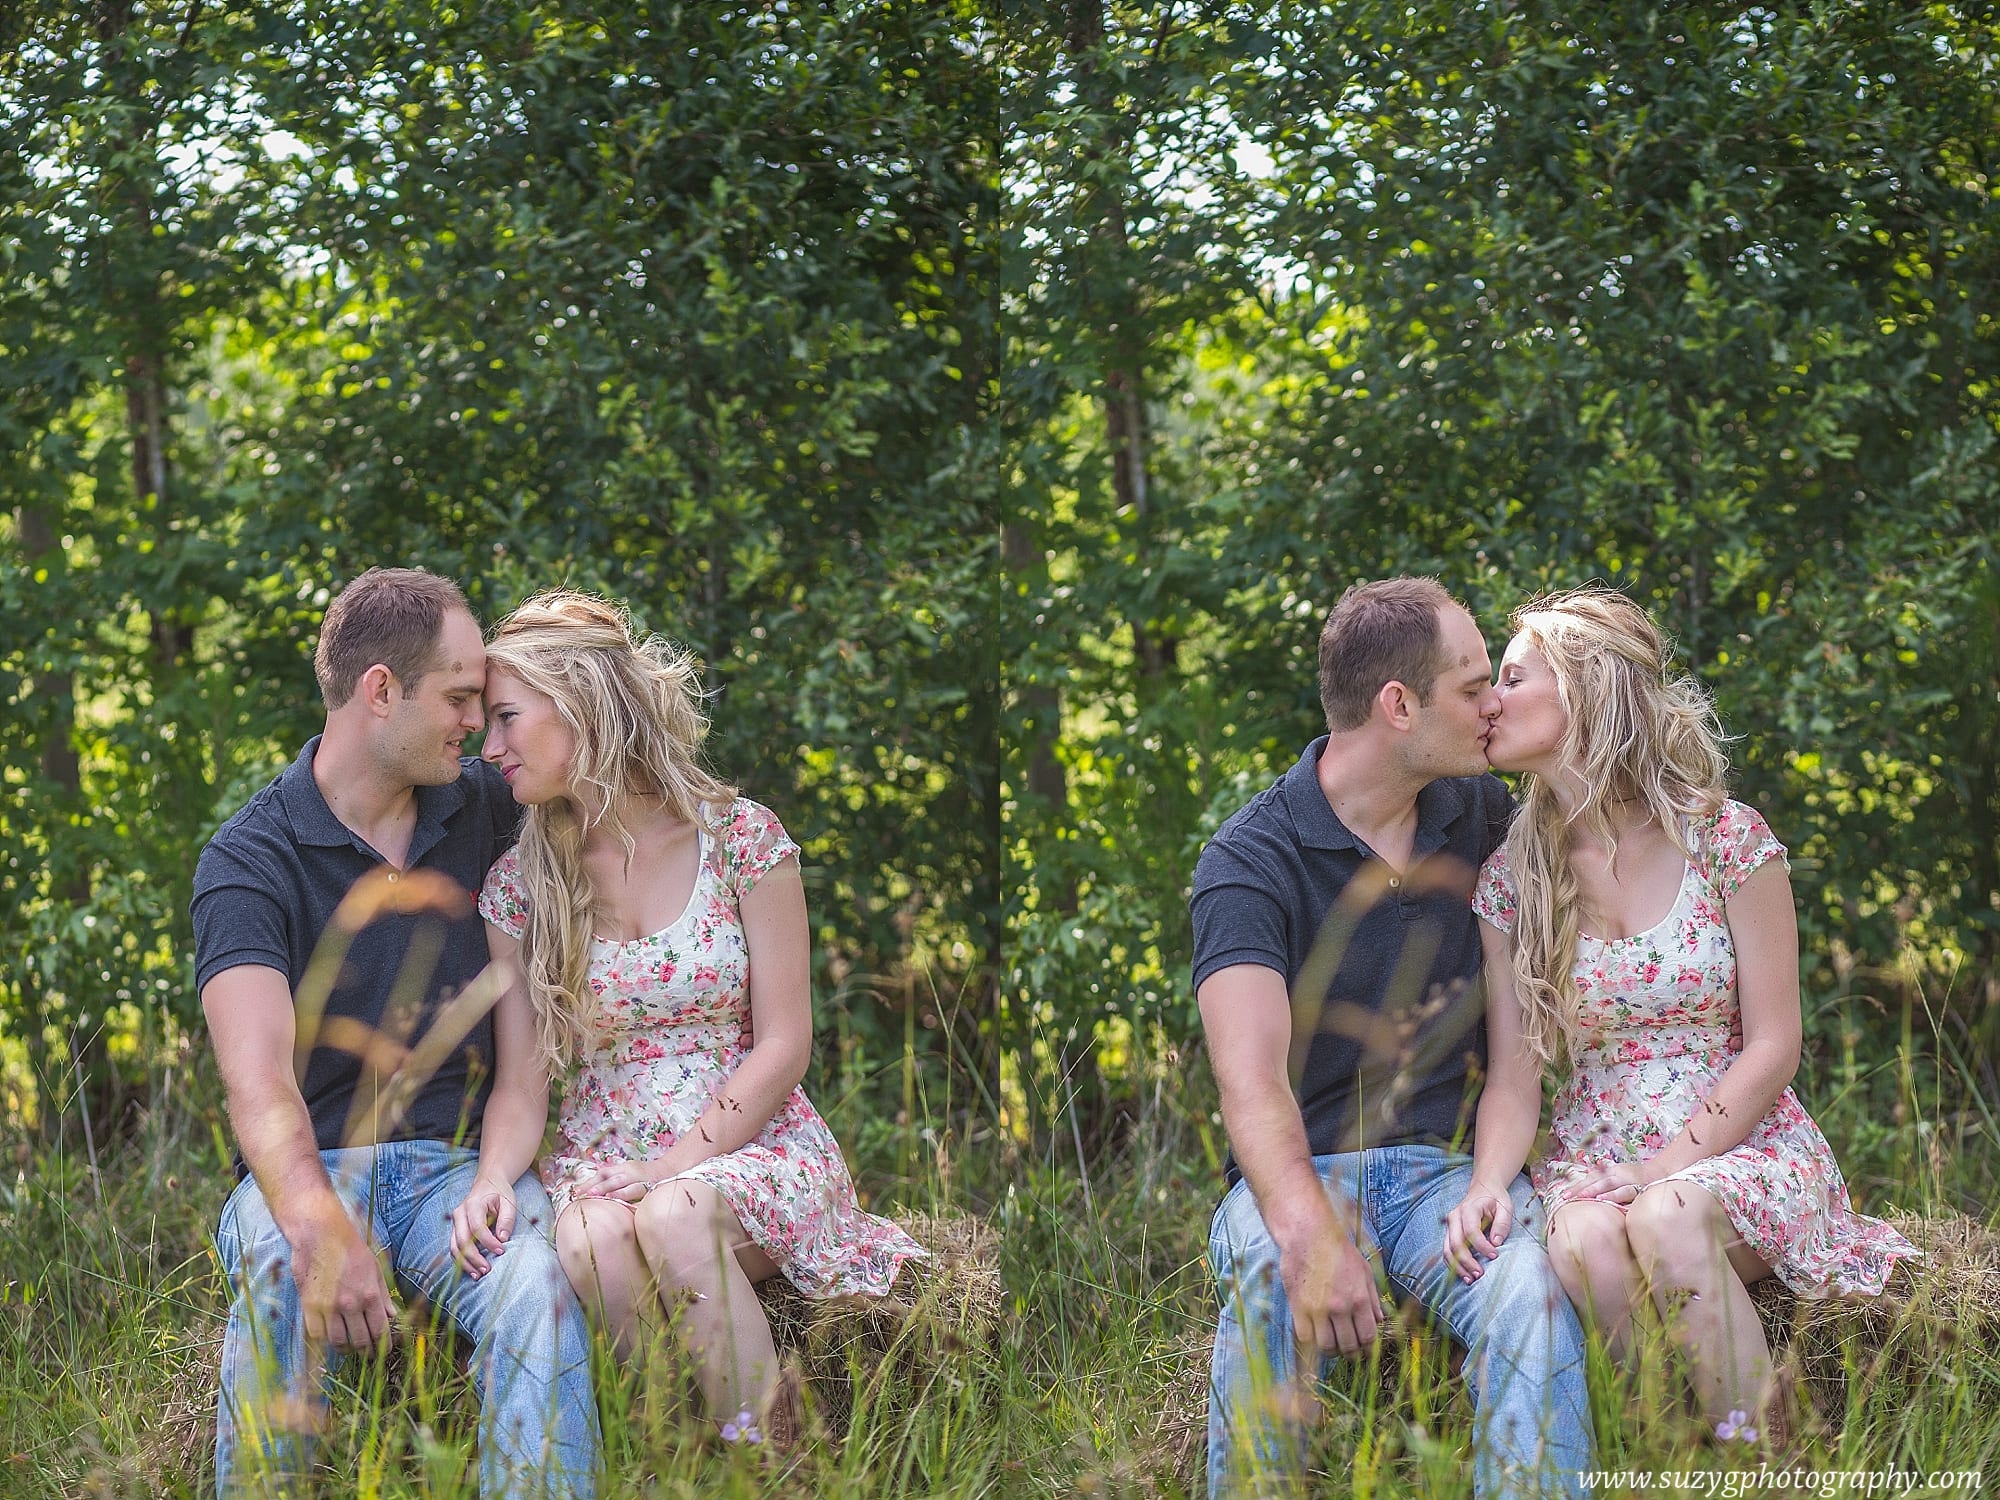 engagements-new orleans-texas-baton rouge-lake charles-suzy g-photography-suzygphotography_0017